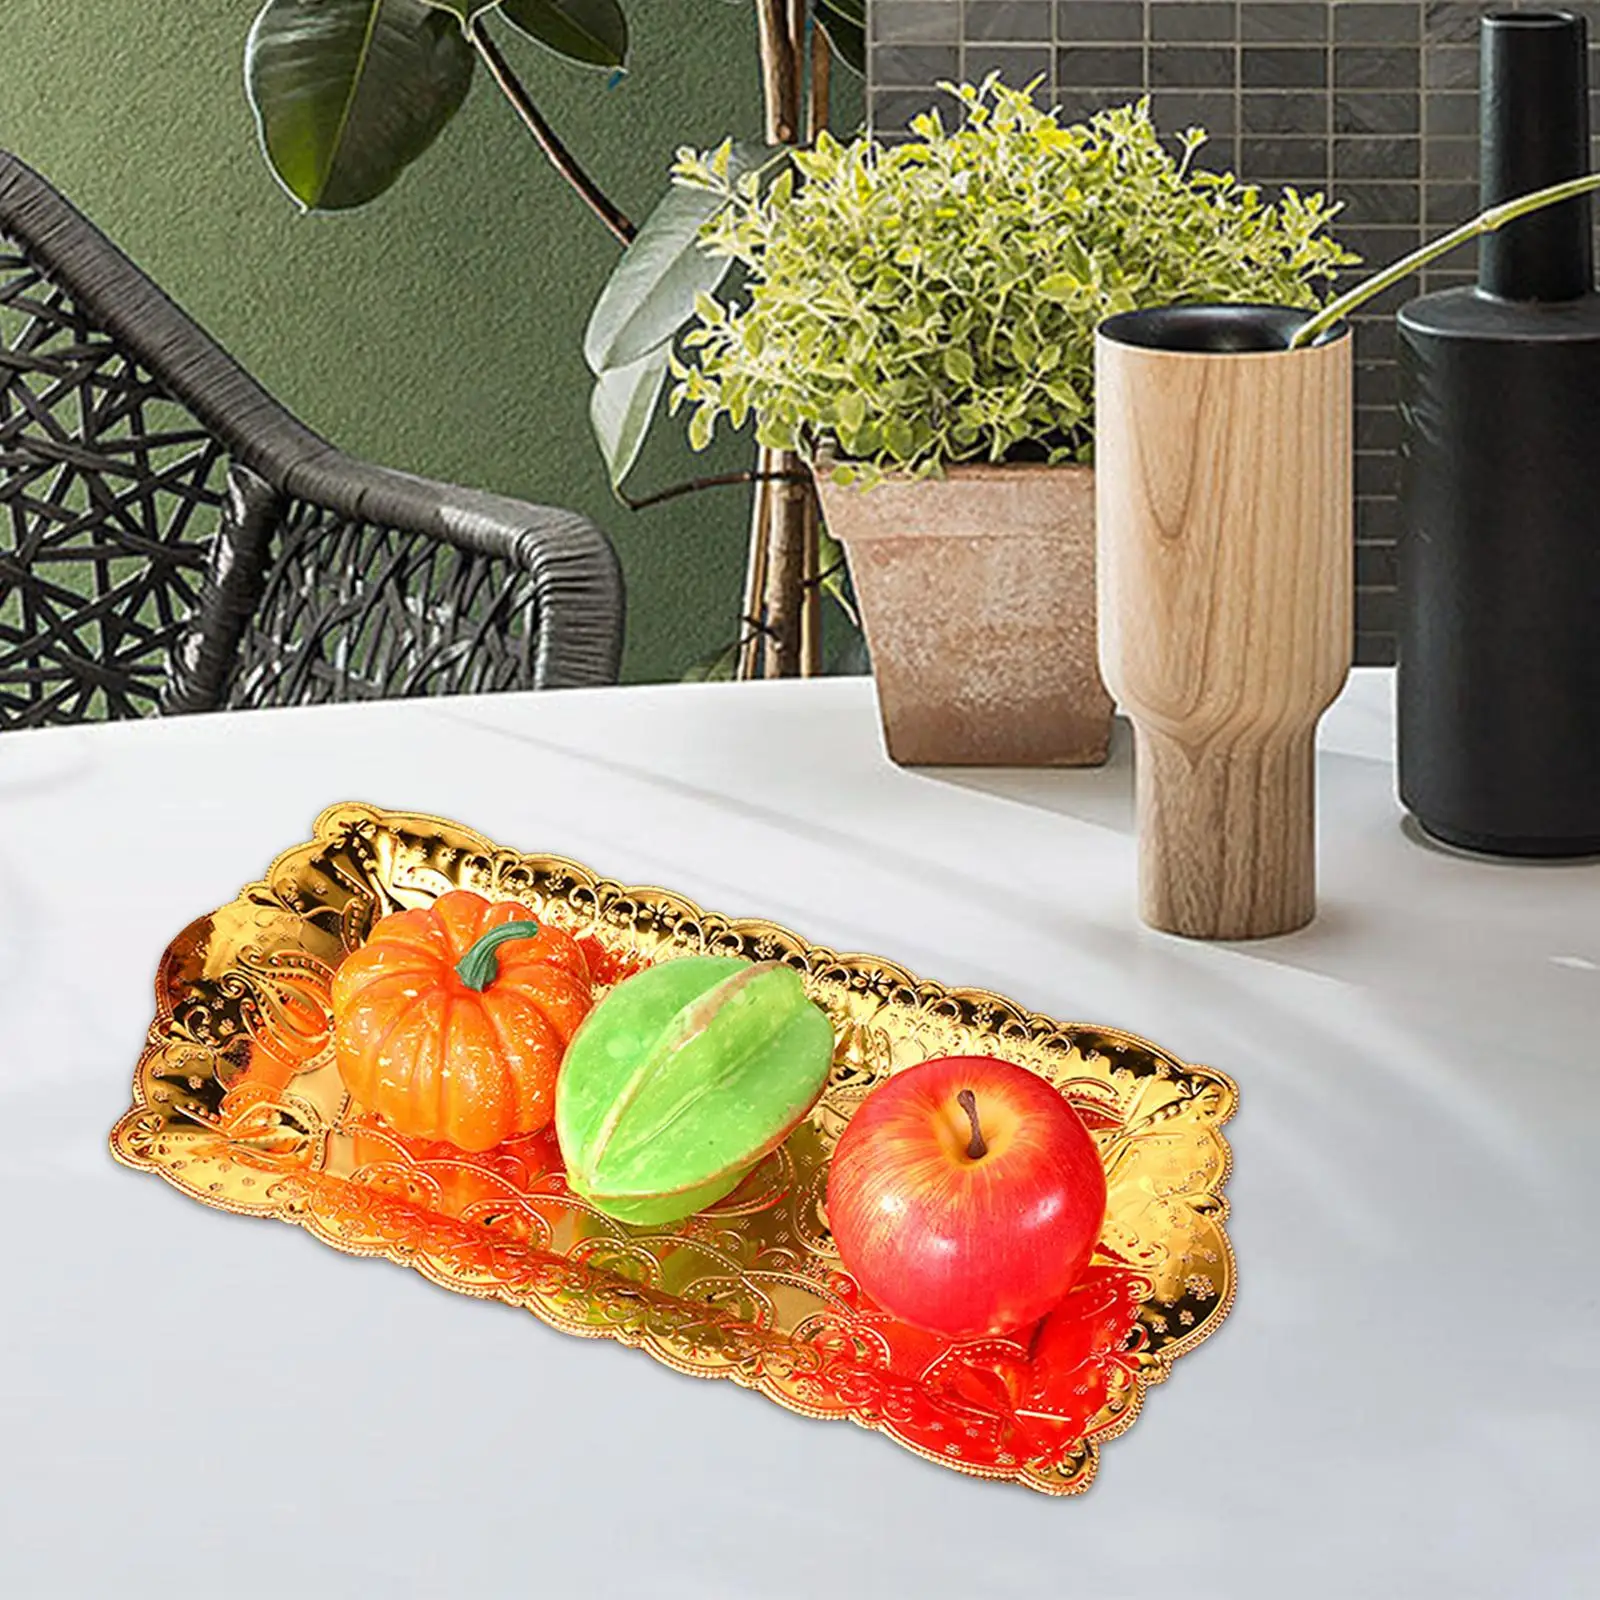 Serving Tray Multifunctional Pastry Plate Decor Decorative Dresser Tray Jewelry Storage for Party Home Kitchen Dining Room Lunch